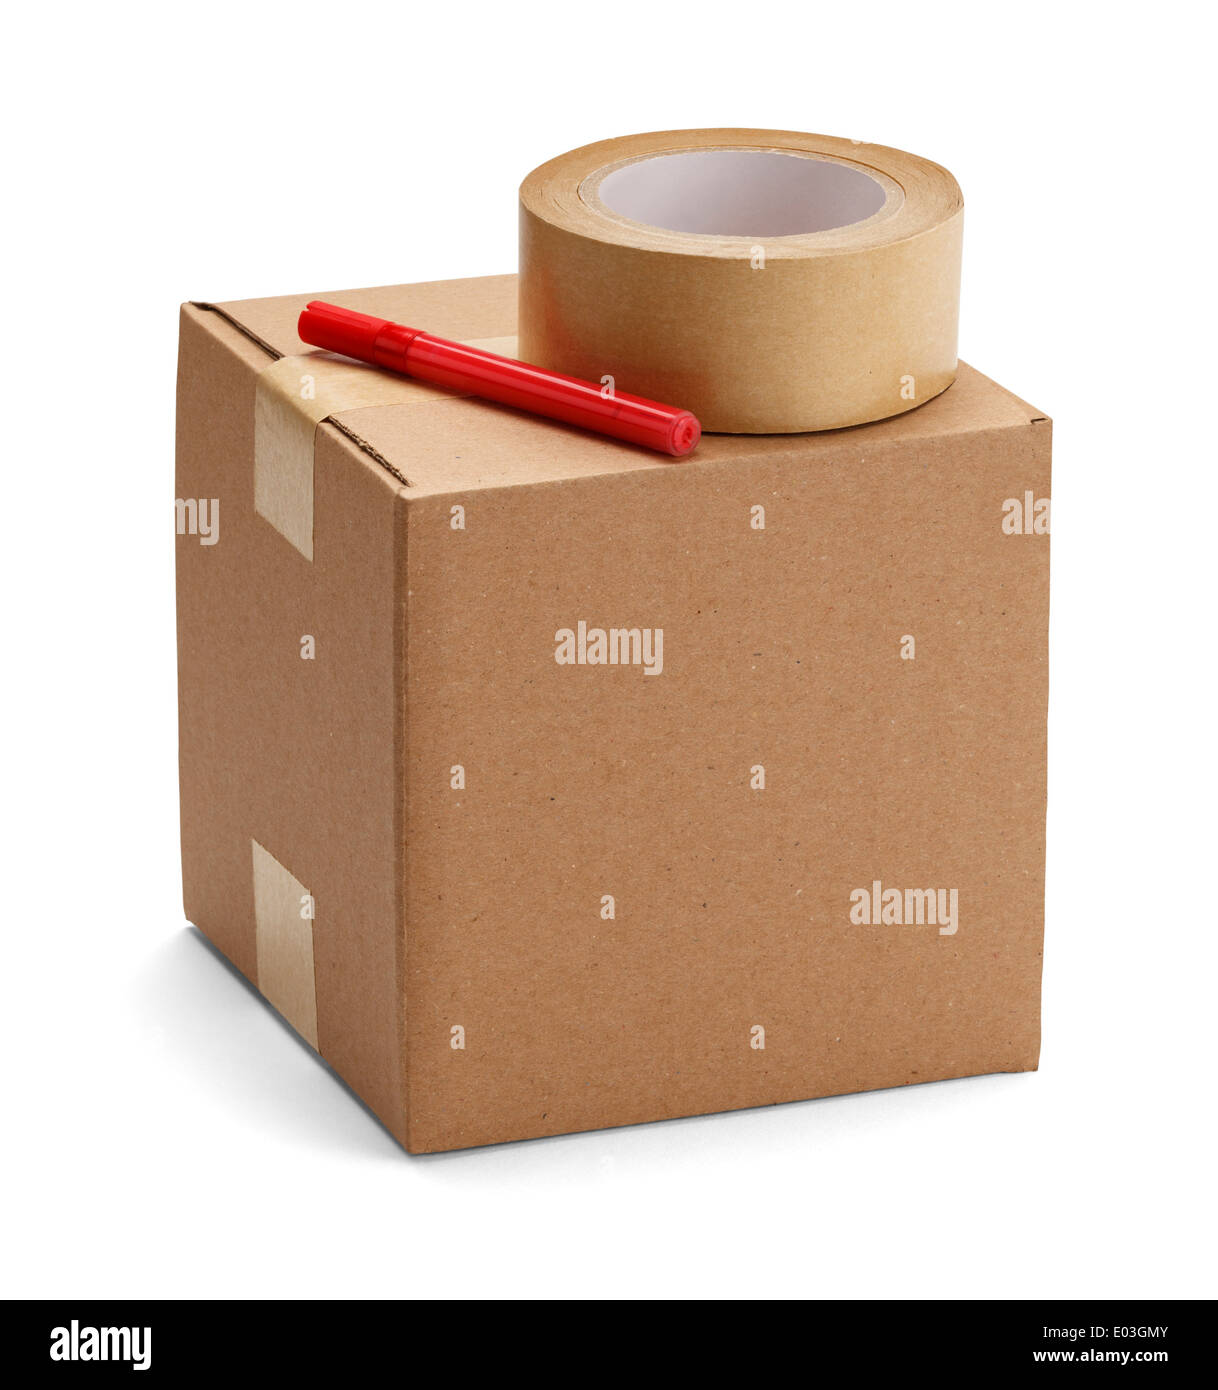 Brown cardboard box with packaging materials isolatedon a white background. Stock Photo